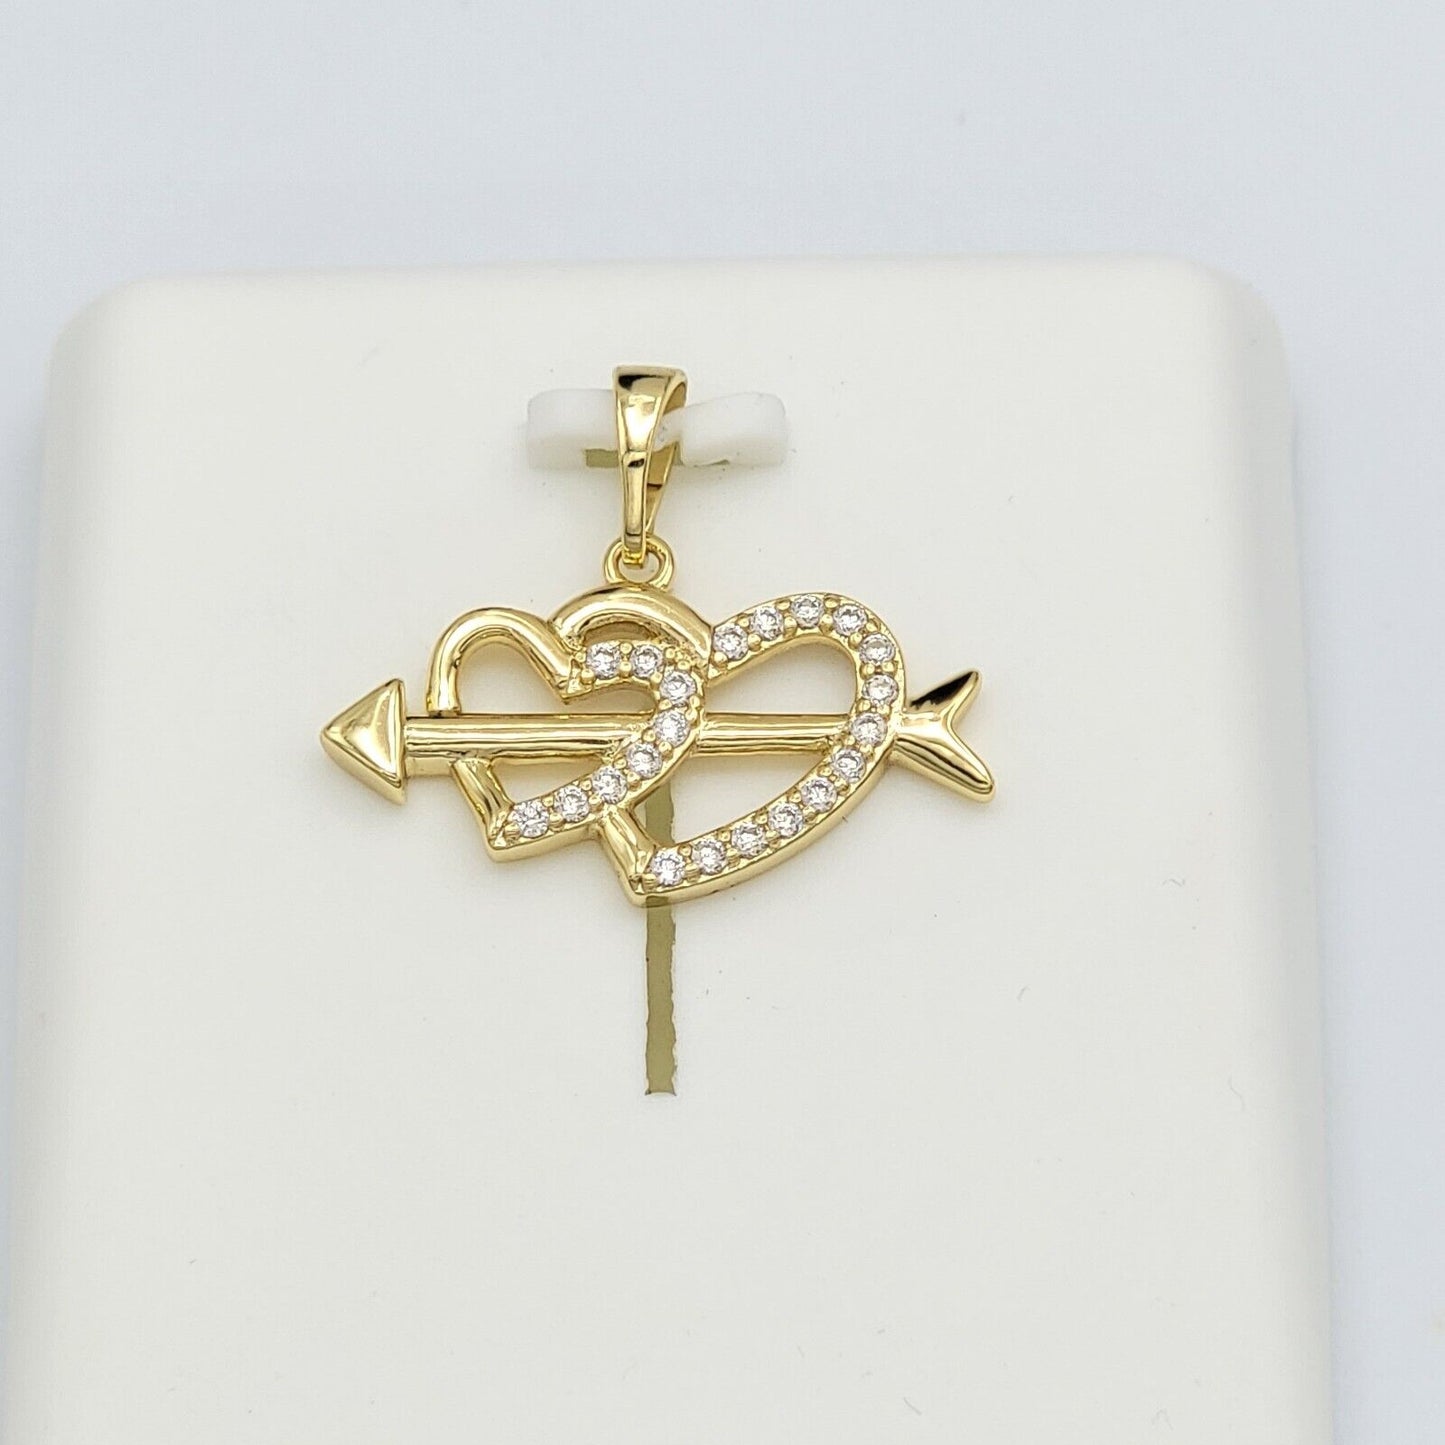 Necklaces - 14K Gold Plated. Double Heart & Arrow Pendant & Chain.